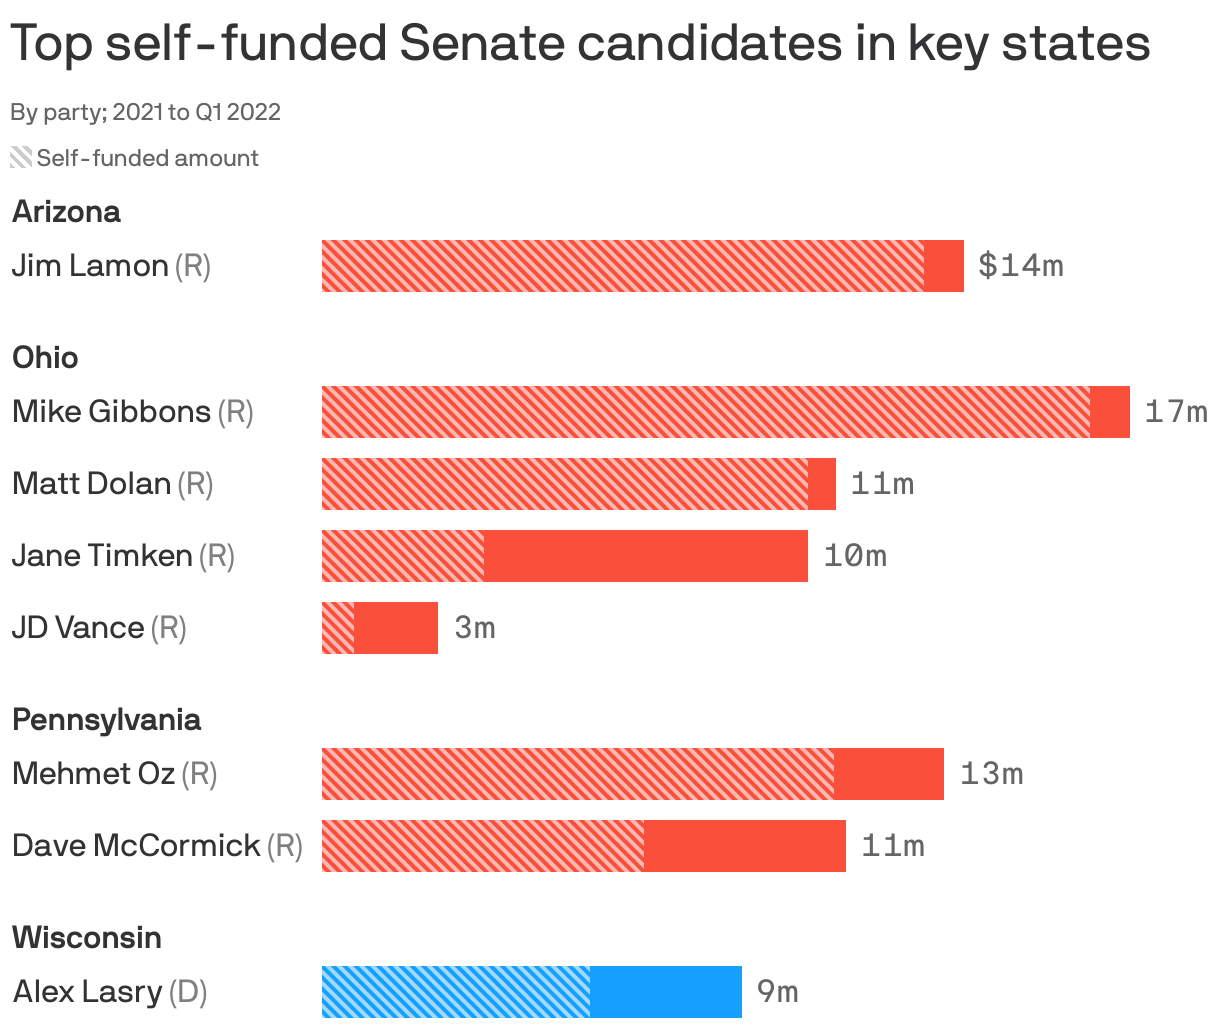 Top self-funded Senate candidates in key states